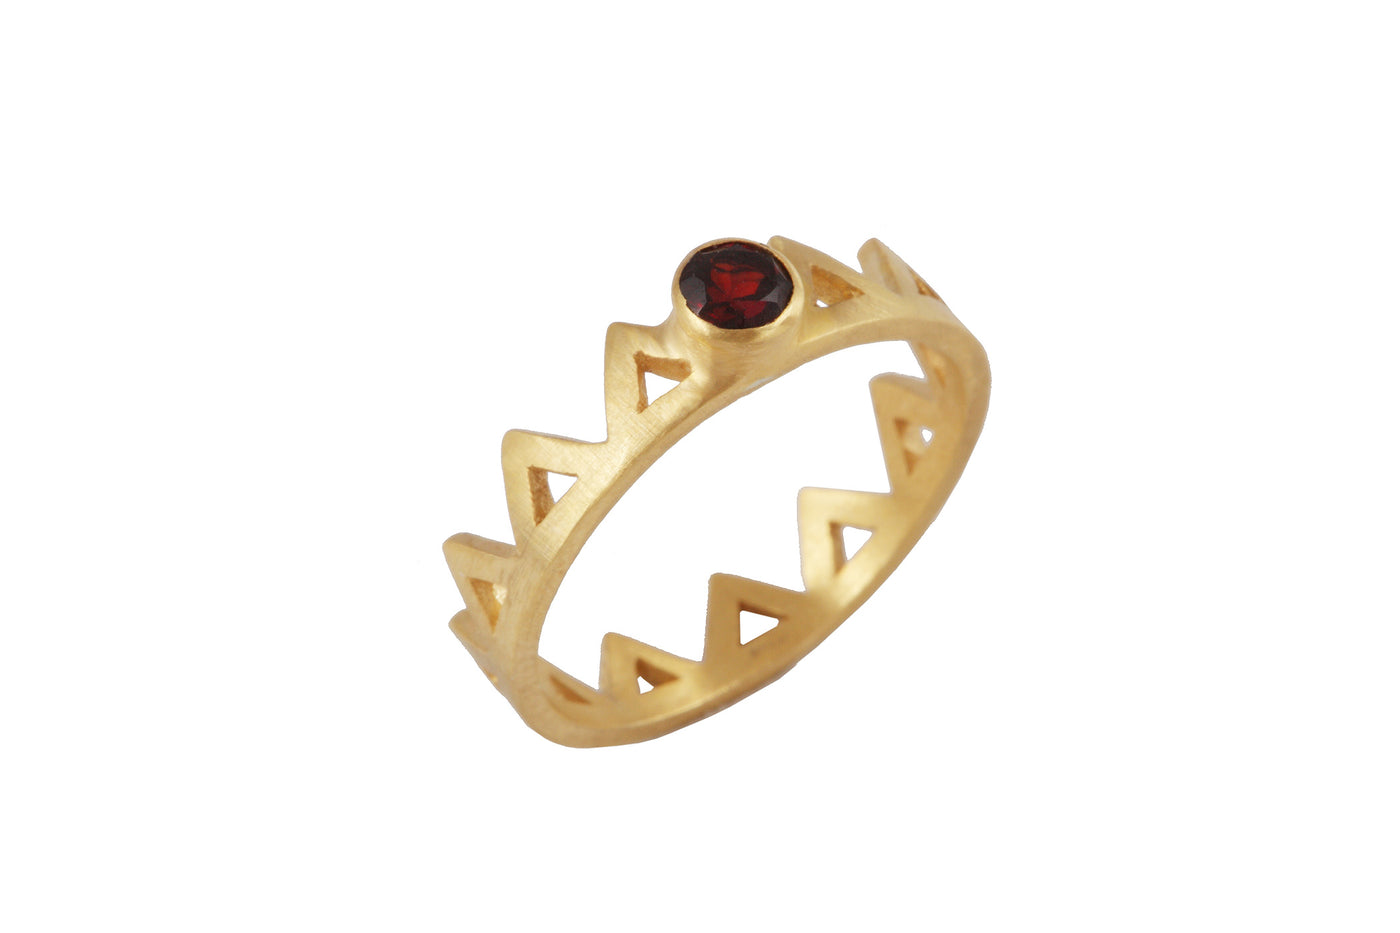 Ring with elements - Fire. Silver, red garnet